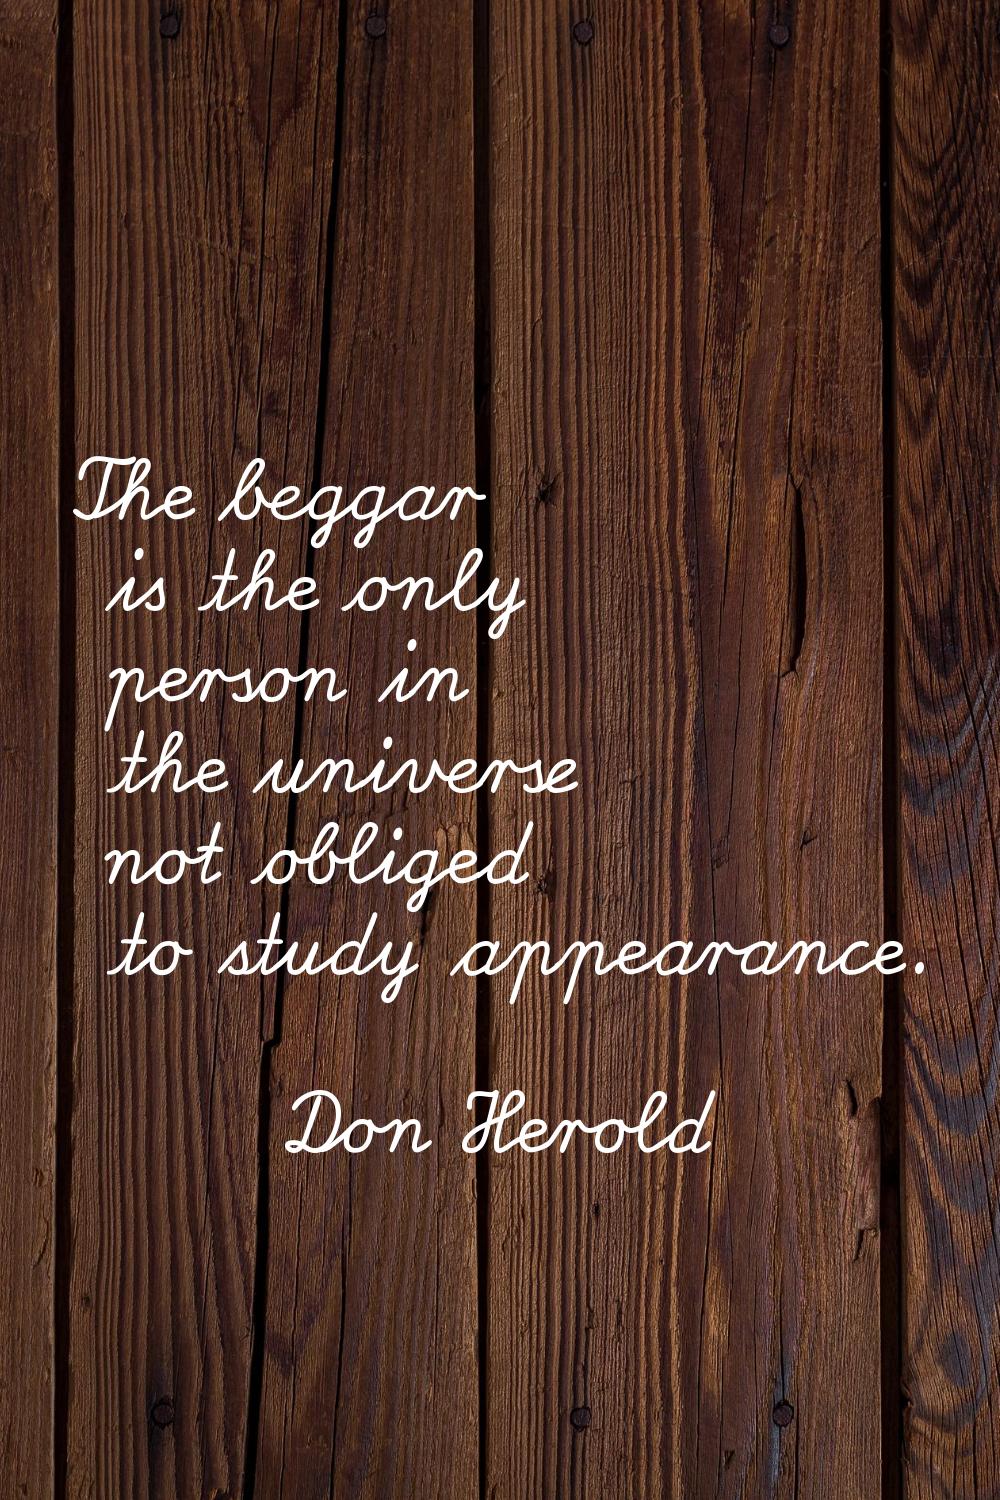 The beggar is the only person in the universe not obliged to study appearance.